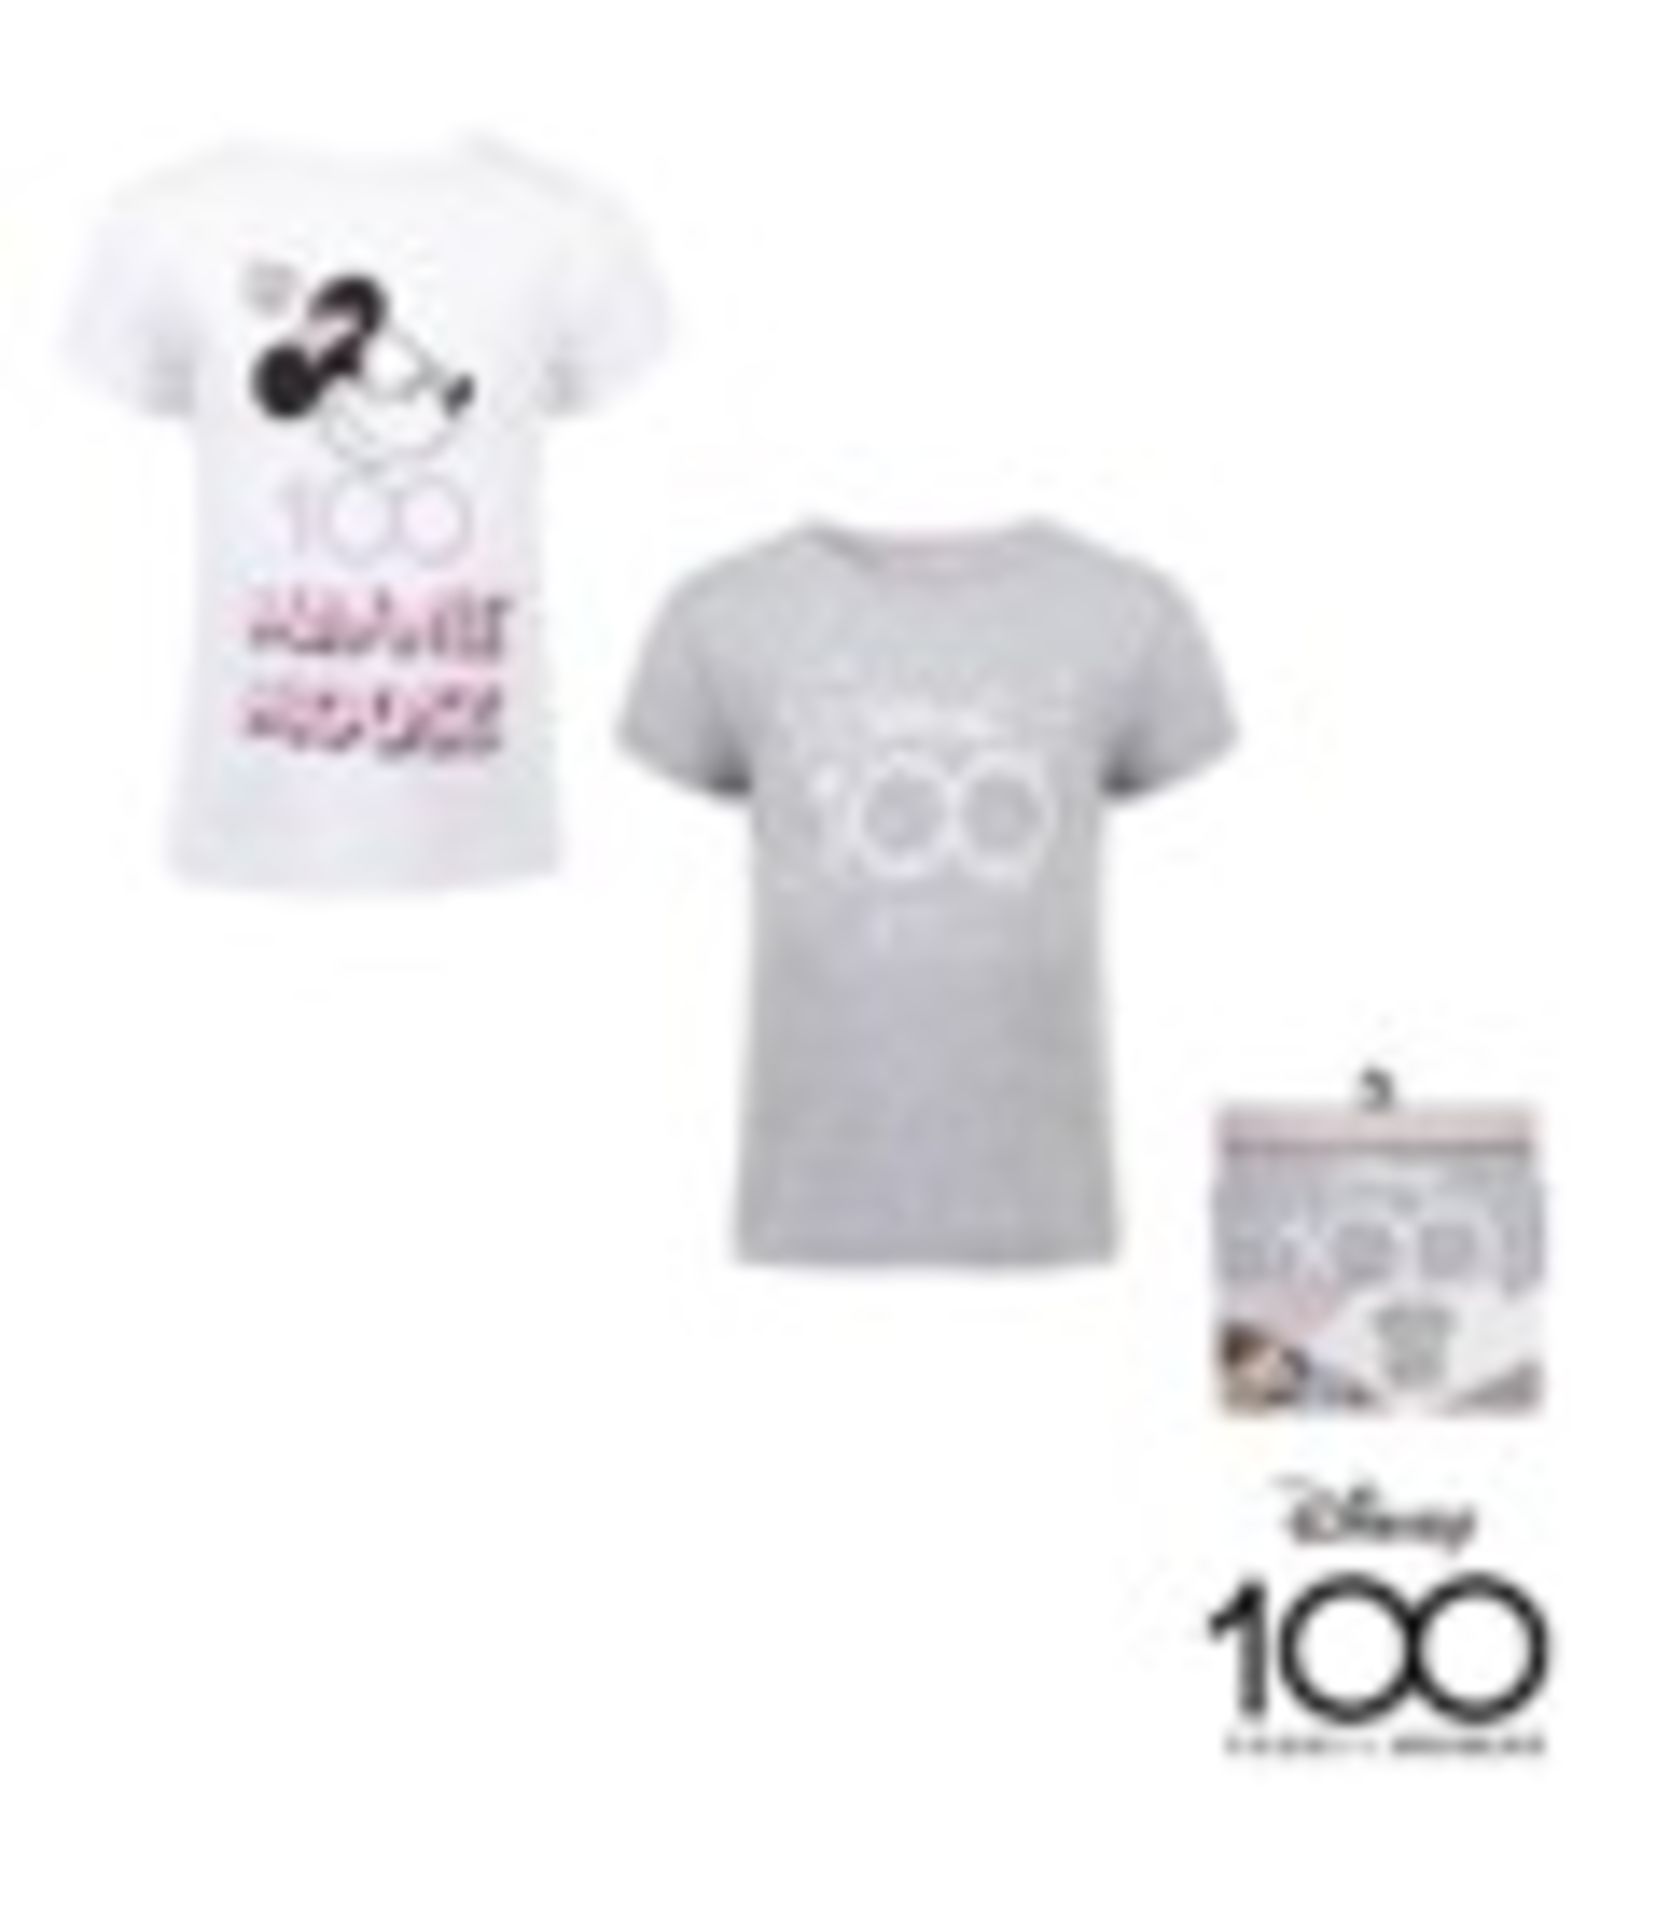 TRADE LOT X 192 NEW AND PACKAGED Disney Minnie Mouse - T-shirt. Ratio Packaged and Assorted Sizes